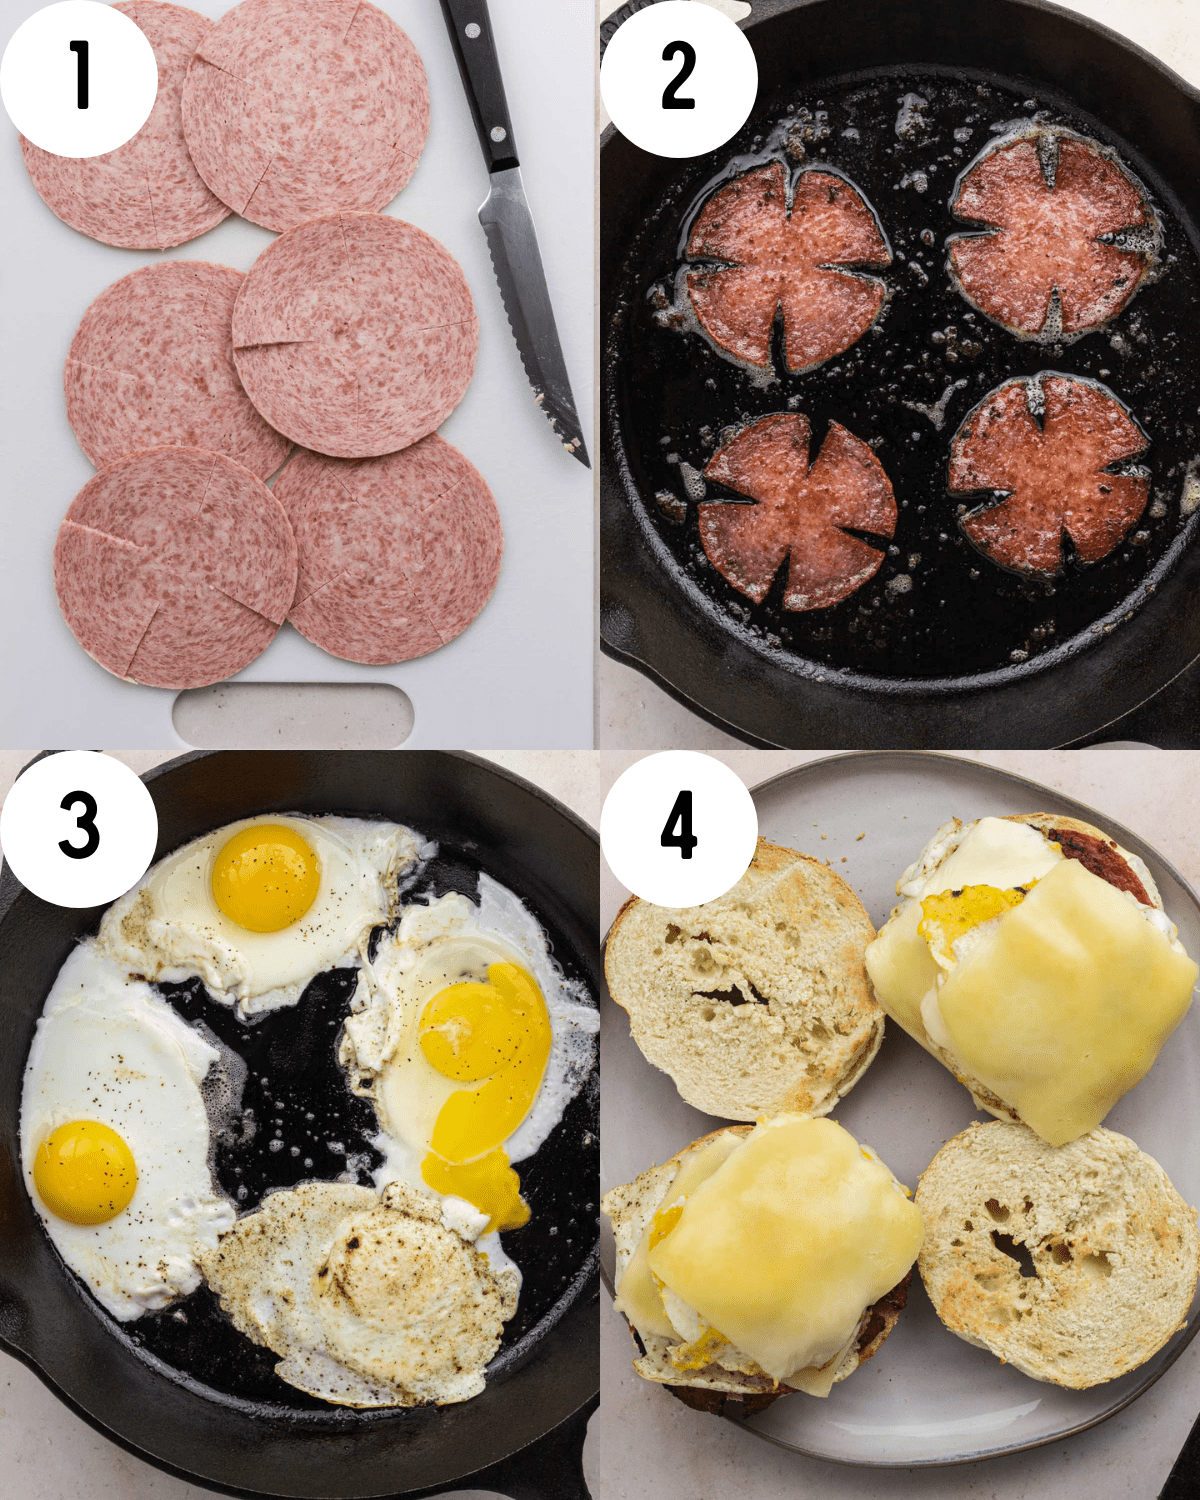 step by step pictures. 1- pork roll scored on cutting board next to a knife. 2- pork roll cooking in a black cast iron pan. 3- fried eggs in a black cast iron pan cooking. 4- cheese on eggs stacked on an open face bagel. 